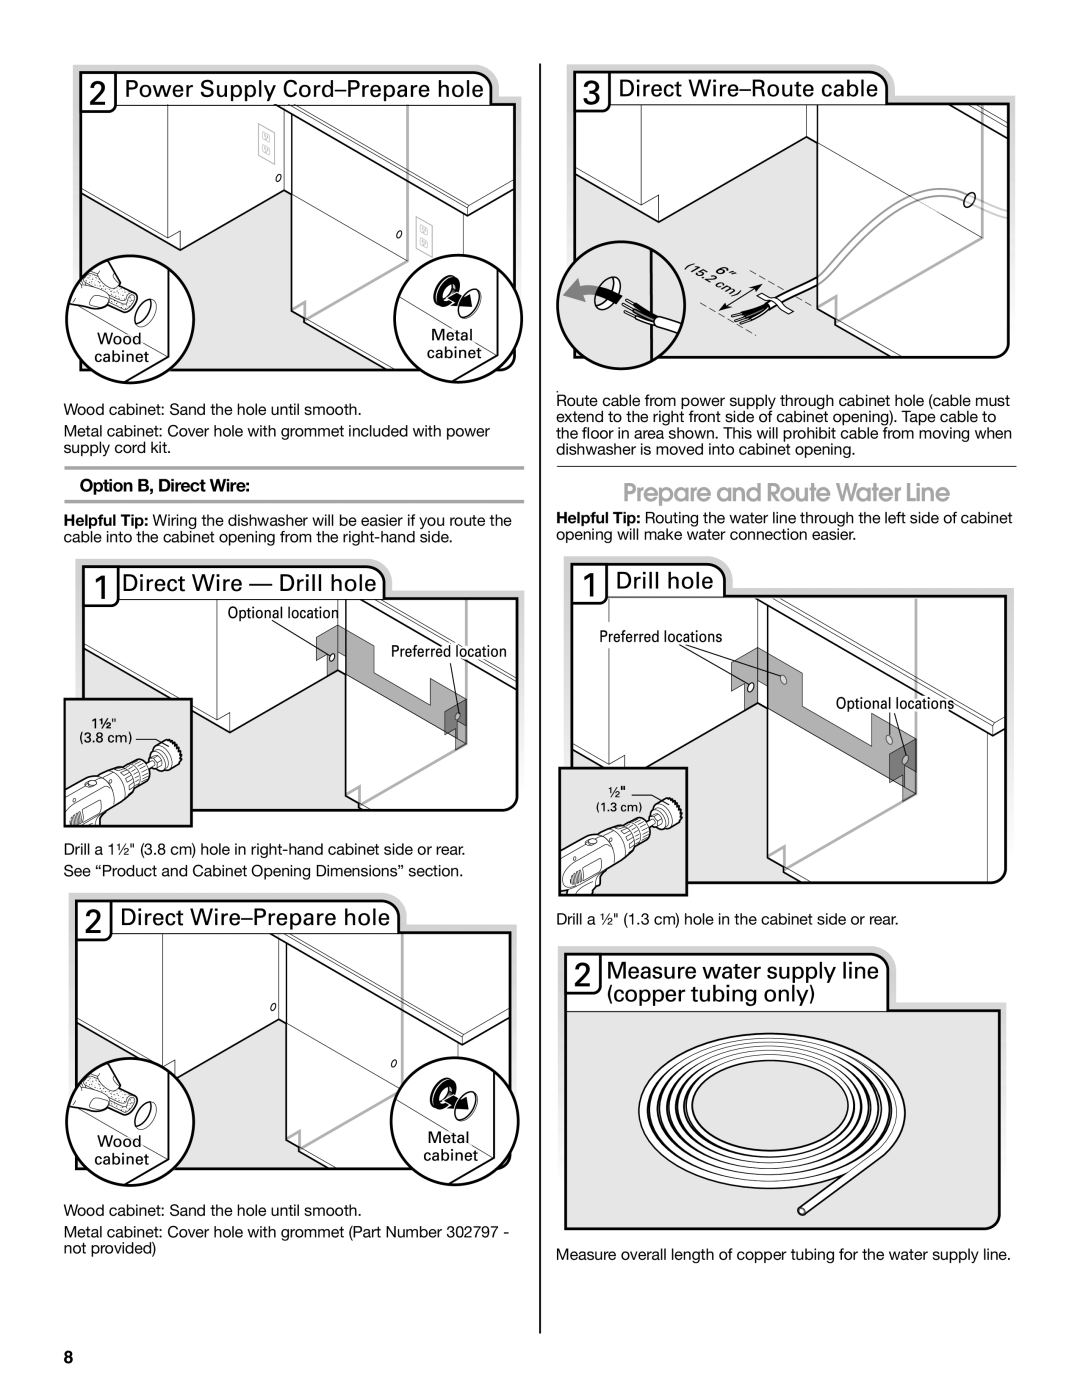 Maytag W10401504D installation instructions Prepare and Route Water Line, Option B, Direct Wire 